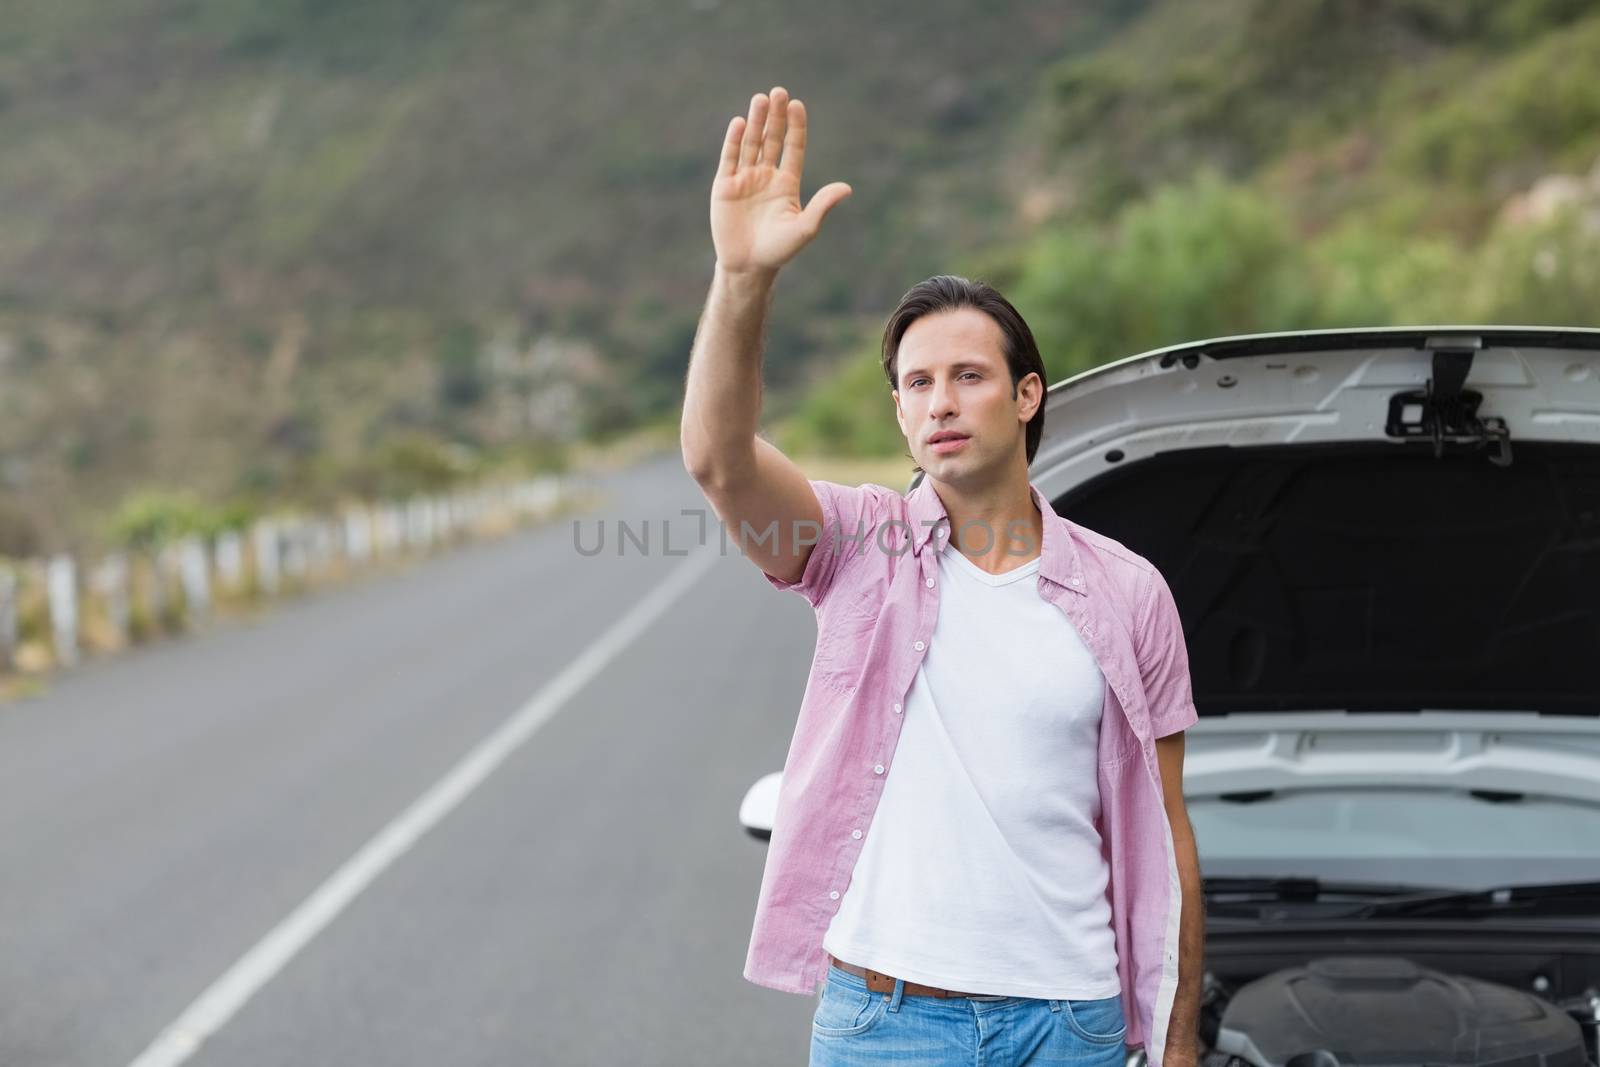 Man waving after a breakdown at the side of the road